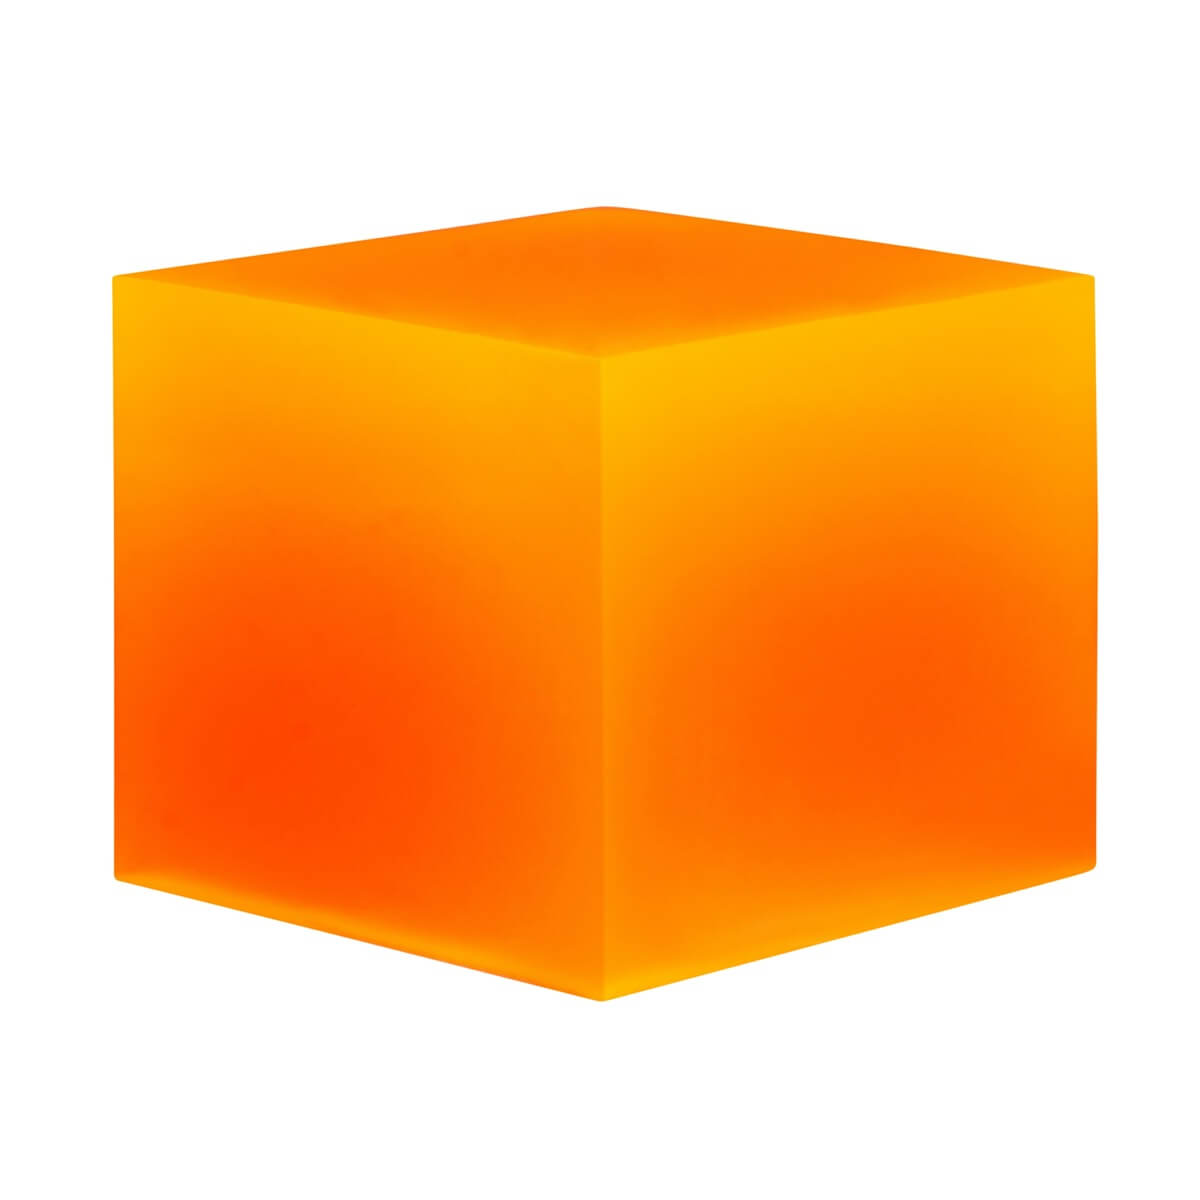 A resin cube made with the Neon Orange Mica Powder Pigment by Pigmently.